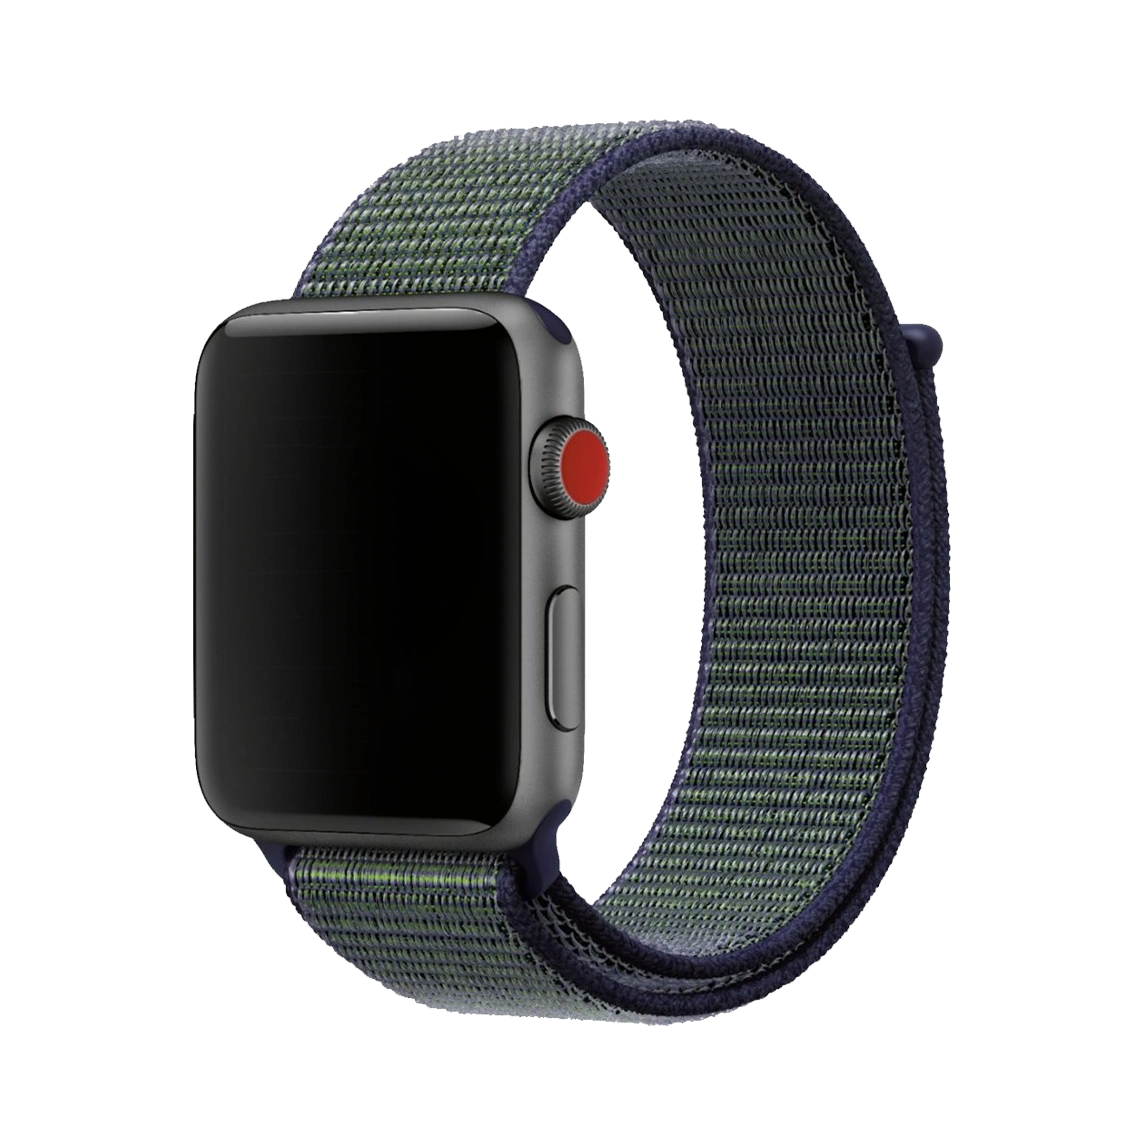 Apple Watch Series 6 Silver Stainless Steel Case with Milanese Loop